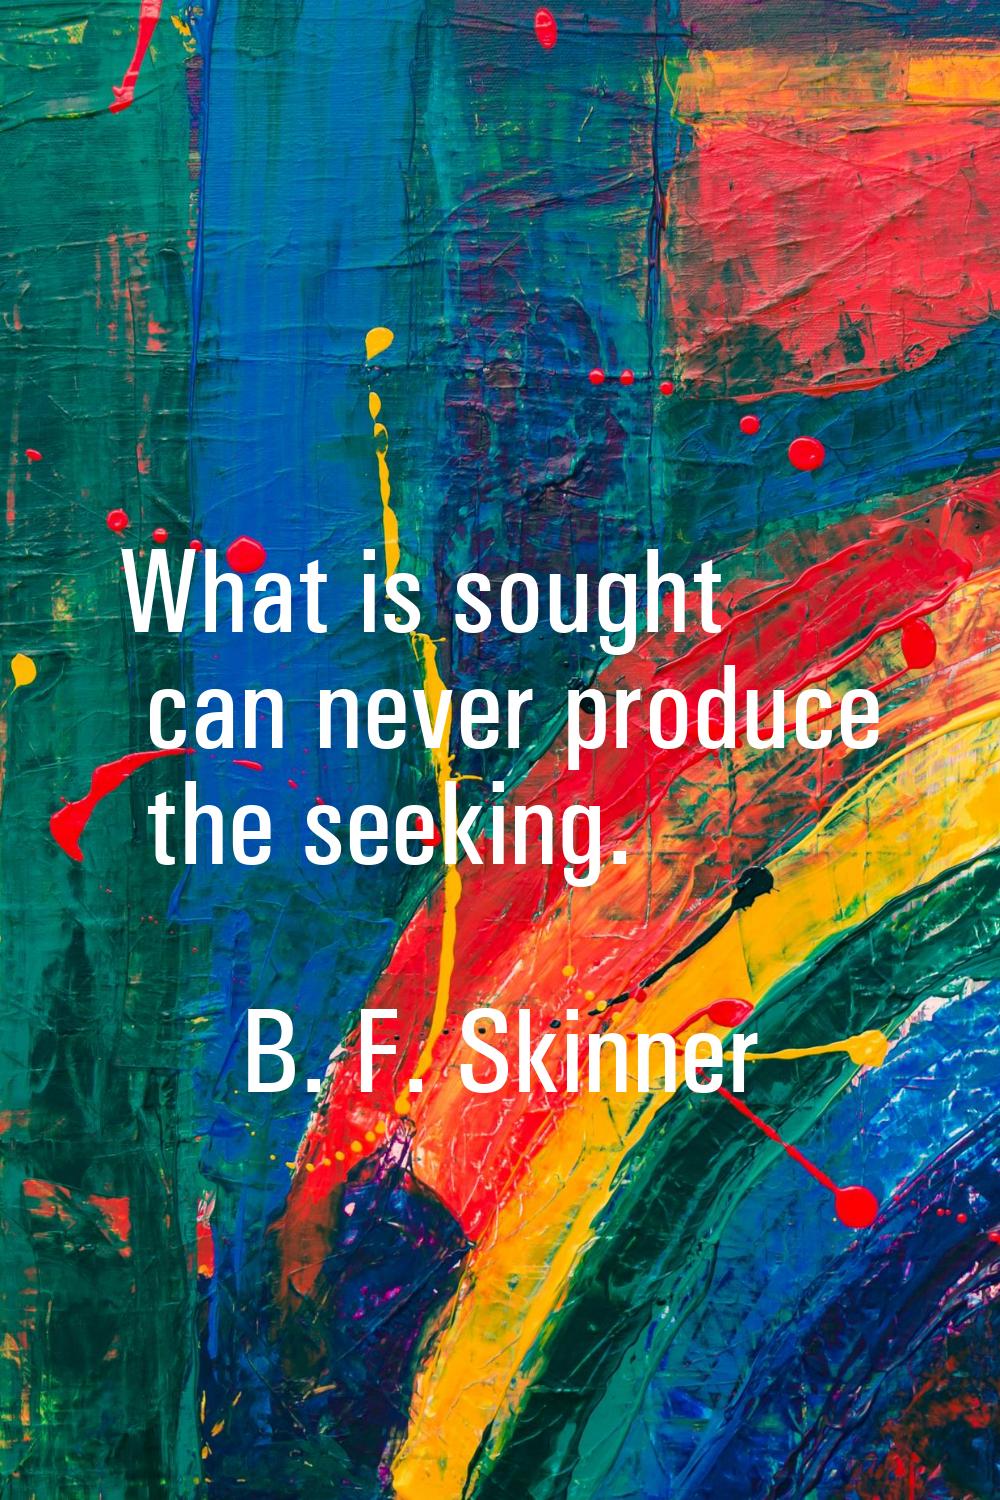 What is sought can never produce the seeking.